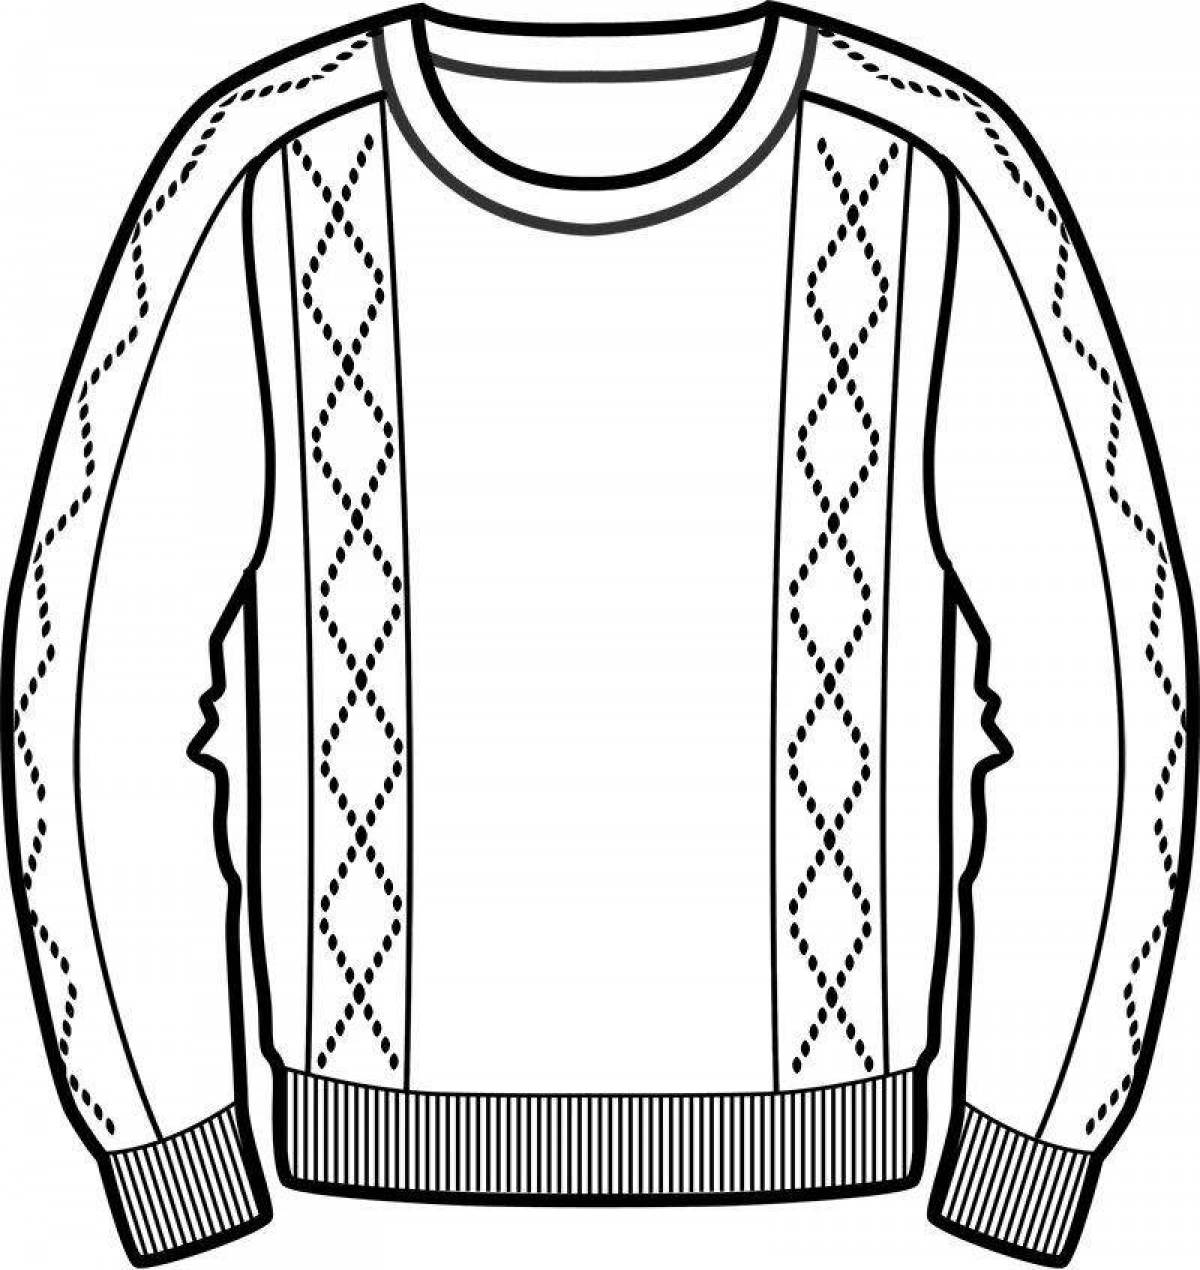 Sparkly sweater coloring book for kids